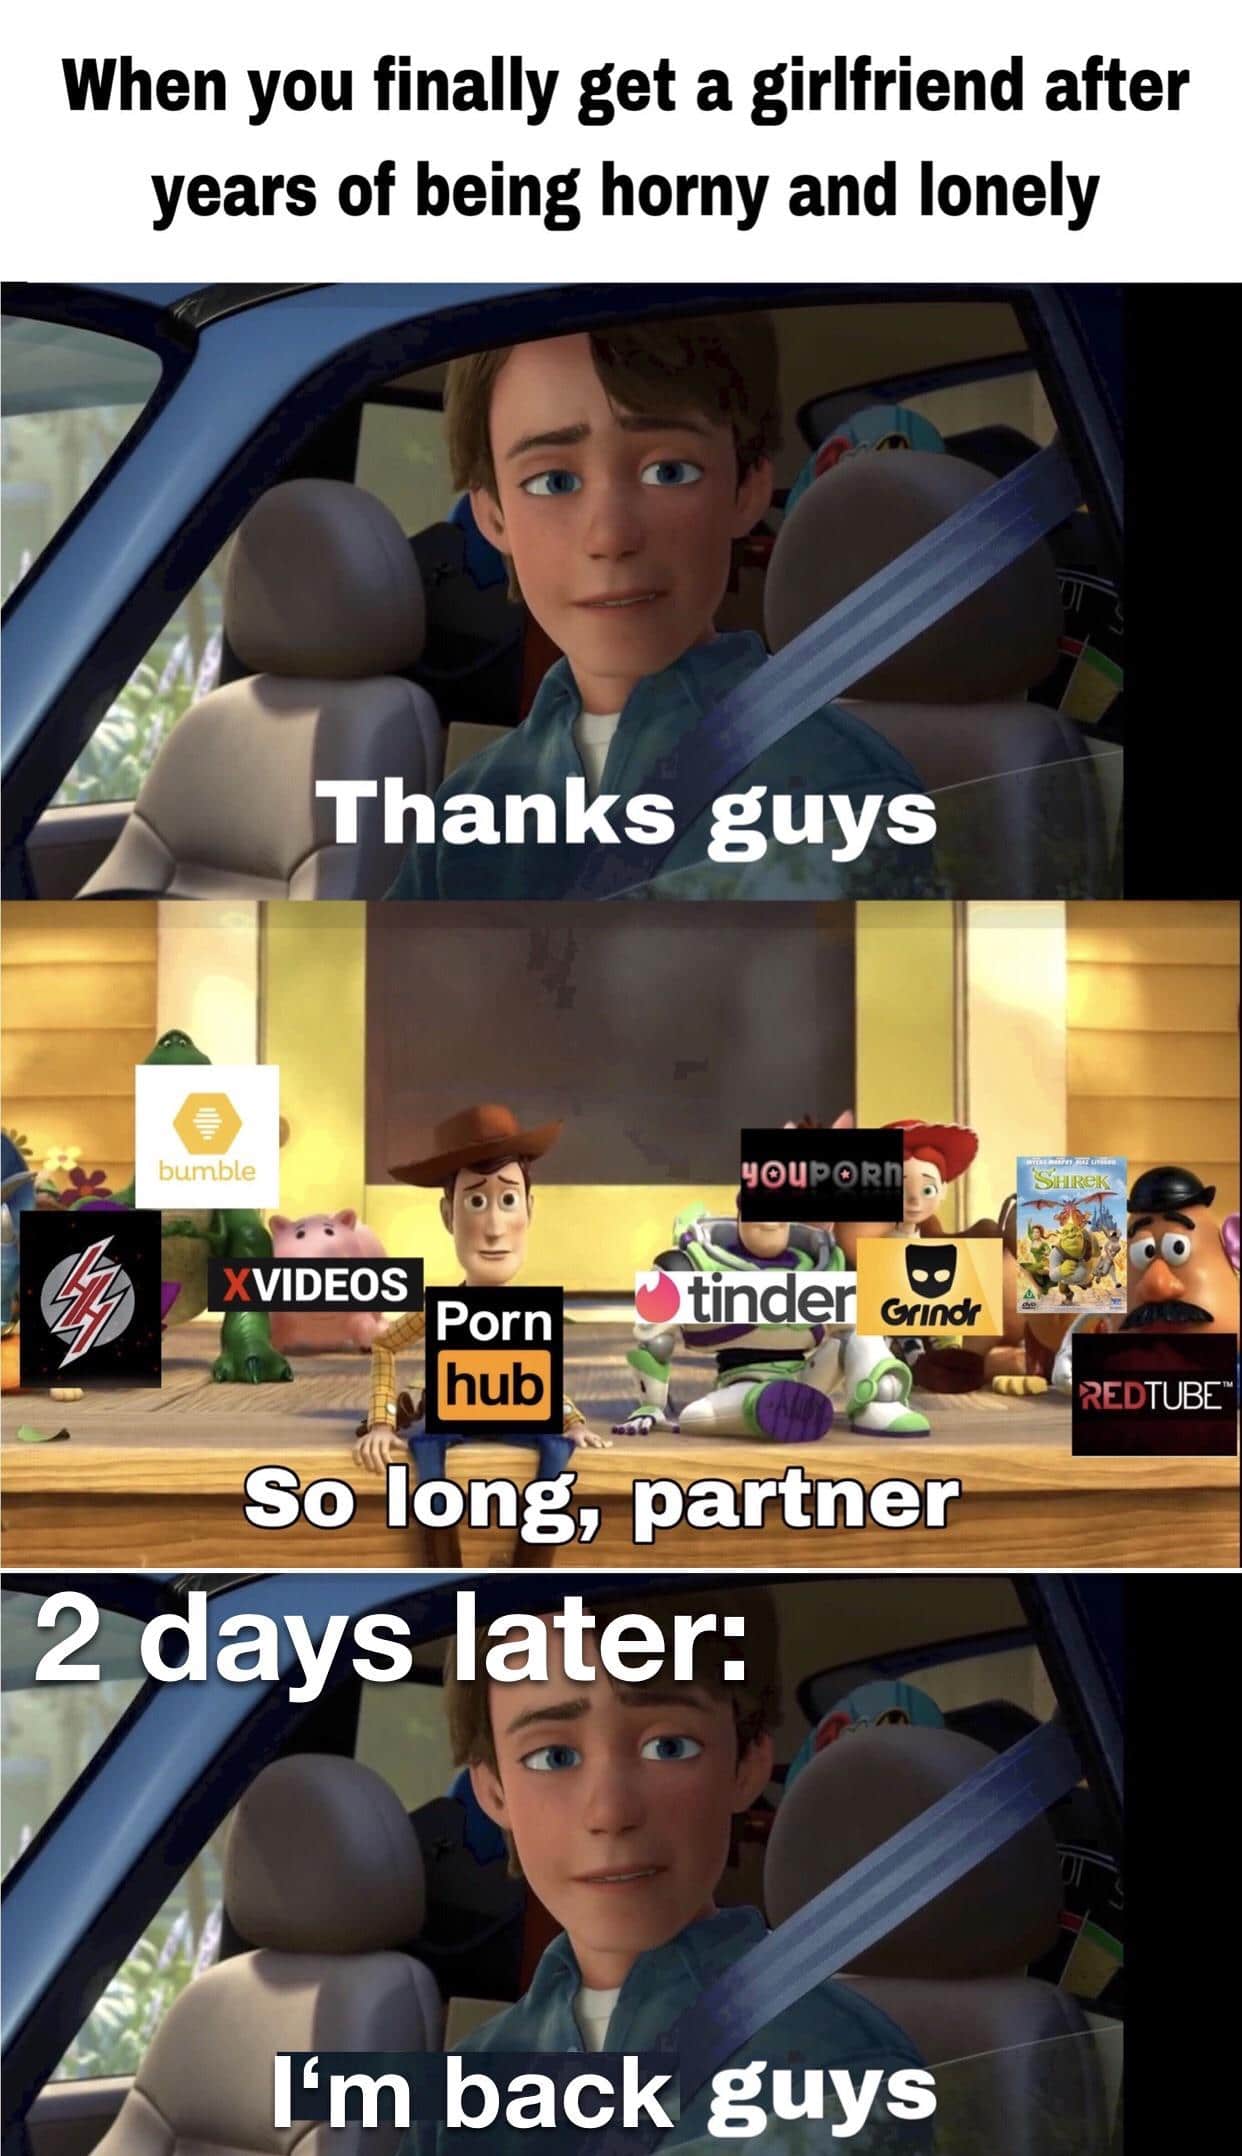 Dank, Shrek, Tinder, Redtube, Reddit, Nhentai Dank Memes Dank, Shrek, Tinder, Redtube, Reddit, Nhentai text: When you finally get a girlfriend after years of being horny and lonely Thanks guys bumble XVIDEOS Porn hub tinder REDTUBE 2 days.later: I,'m back guys 